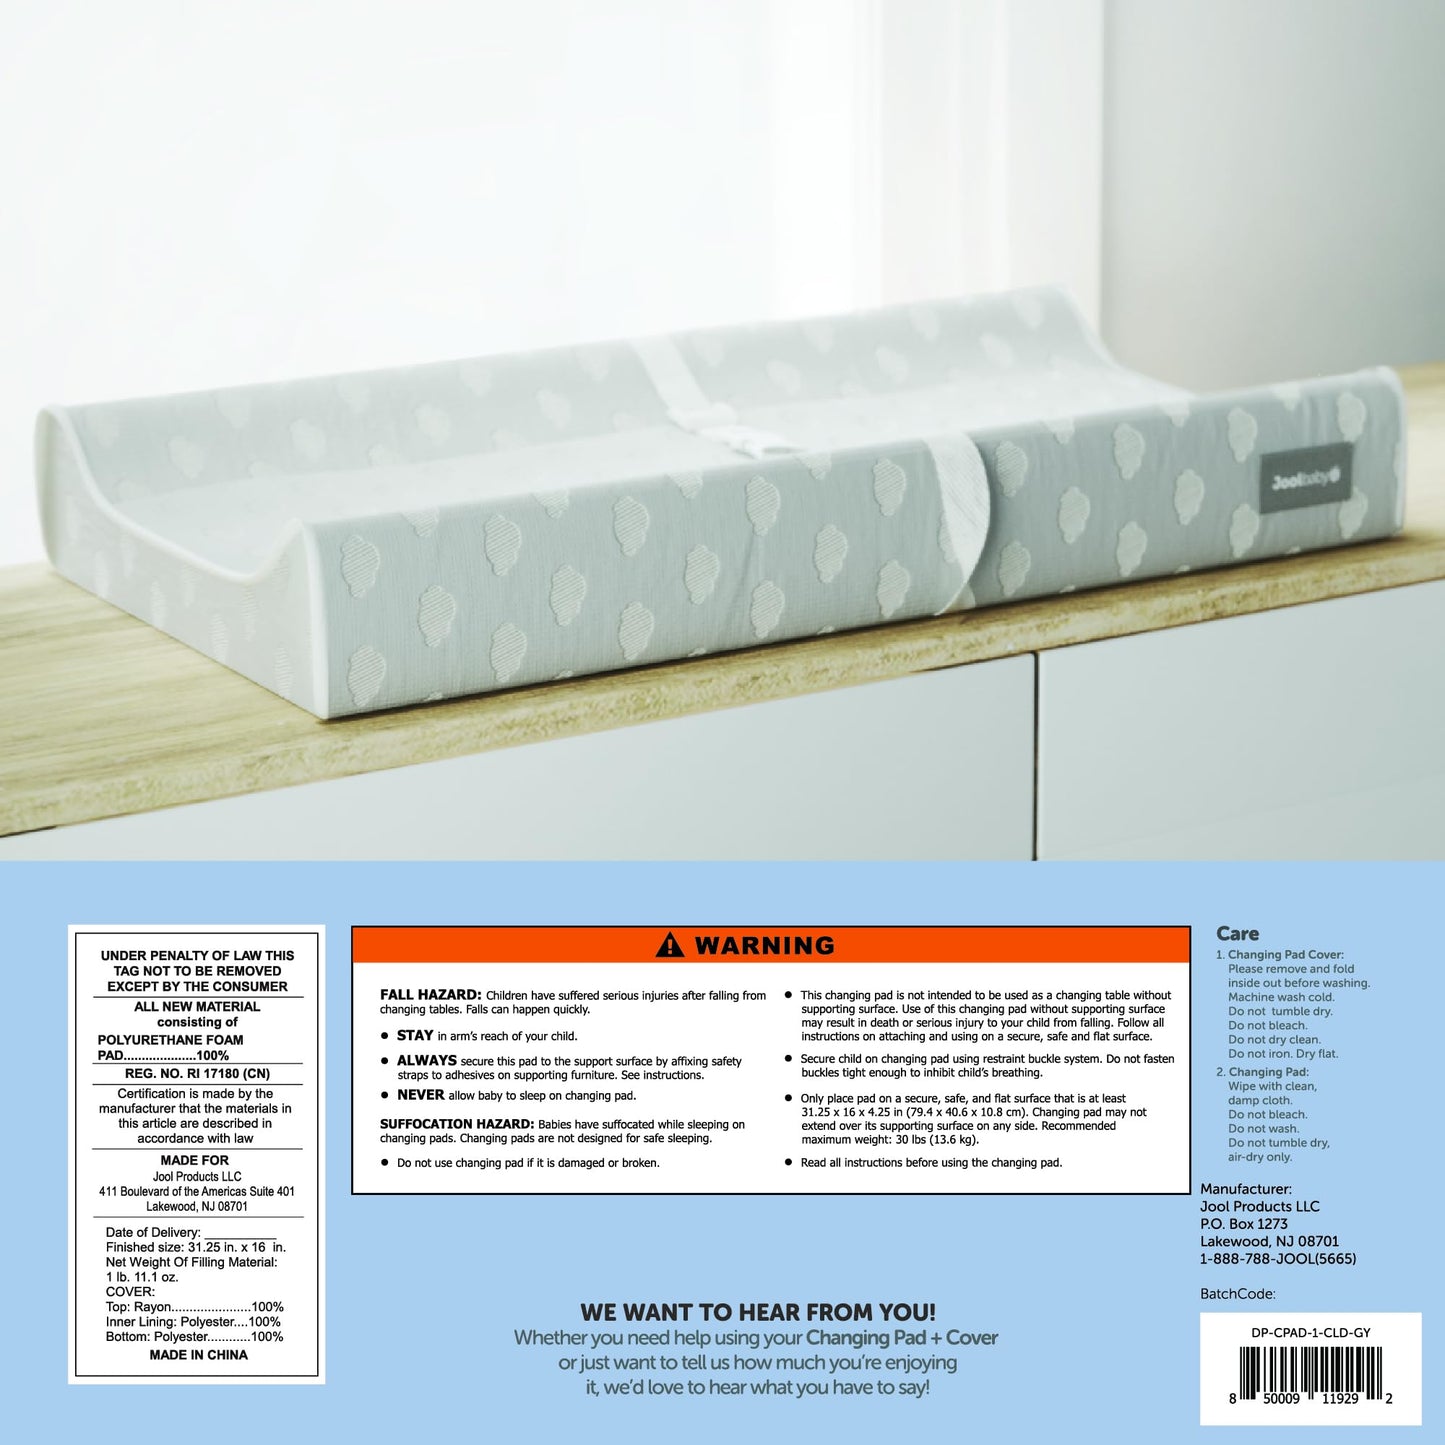 Jool Baby Changing Pad - Contoured, Waterproof & Non-Slip, Includes a Cozy, Breathable, & Washable Cover (Gray)